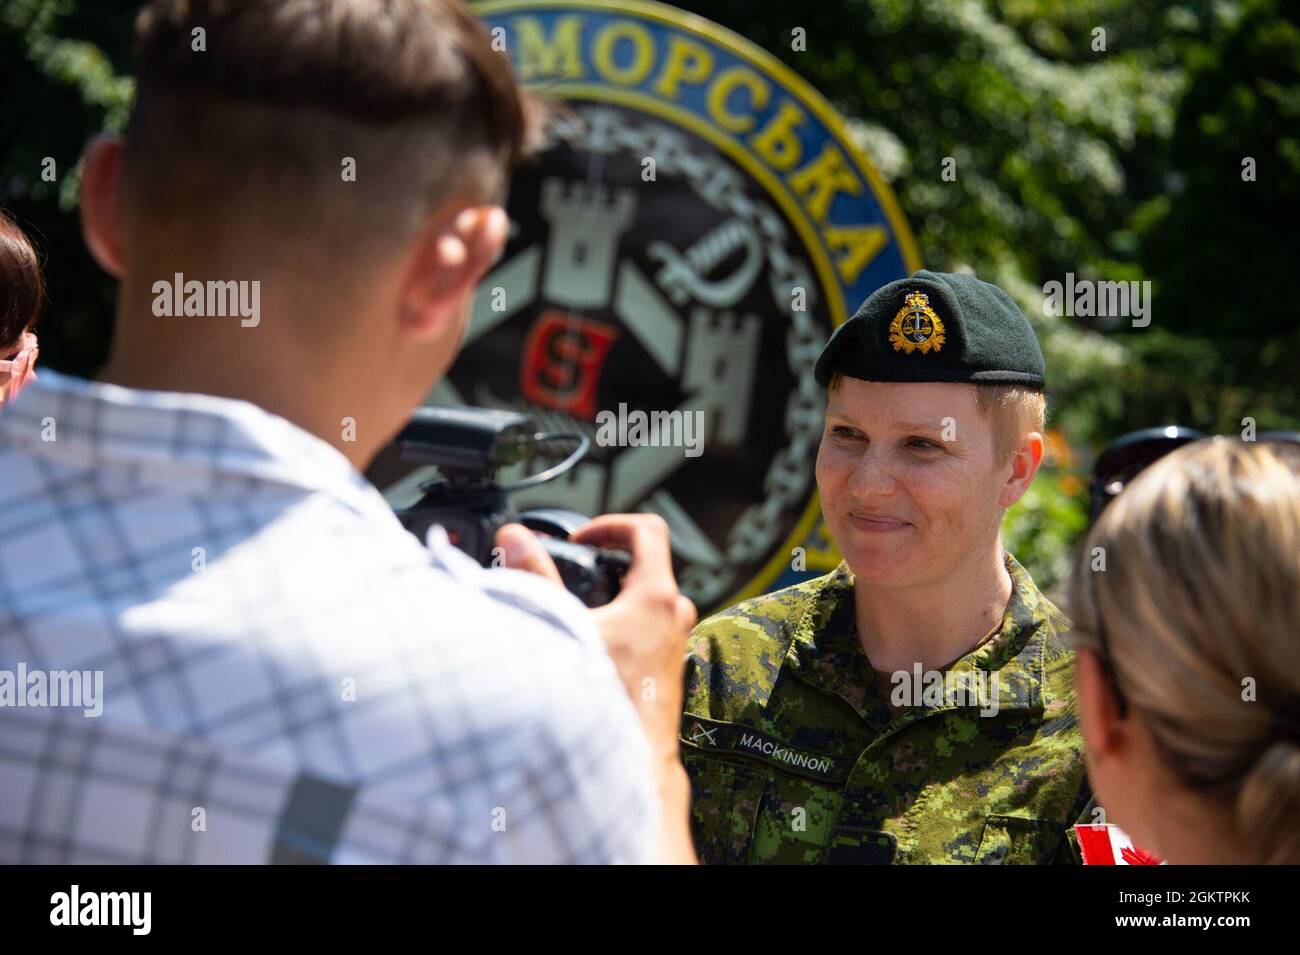 210701-F-D0094-0010 ODESA, Ukraine (July 1, 2021) Major Emily MacKinnon, a Legal Advisor from the Canadian Armed Forces (CAF), responds to interview questions by the Ukrainian Ministry of Defence reporters during Exercise SEA BREEZE 21 in Odesa, Ukraine on July 1, 2021. Co-hosted by the United States Navy Stock Photo